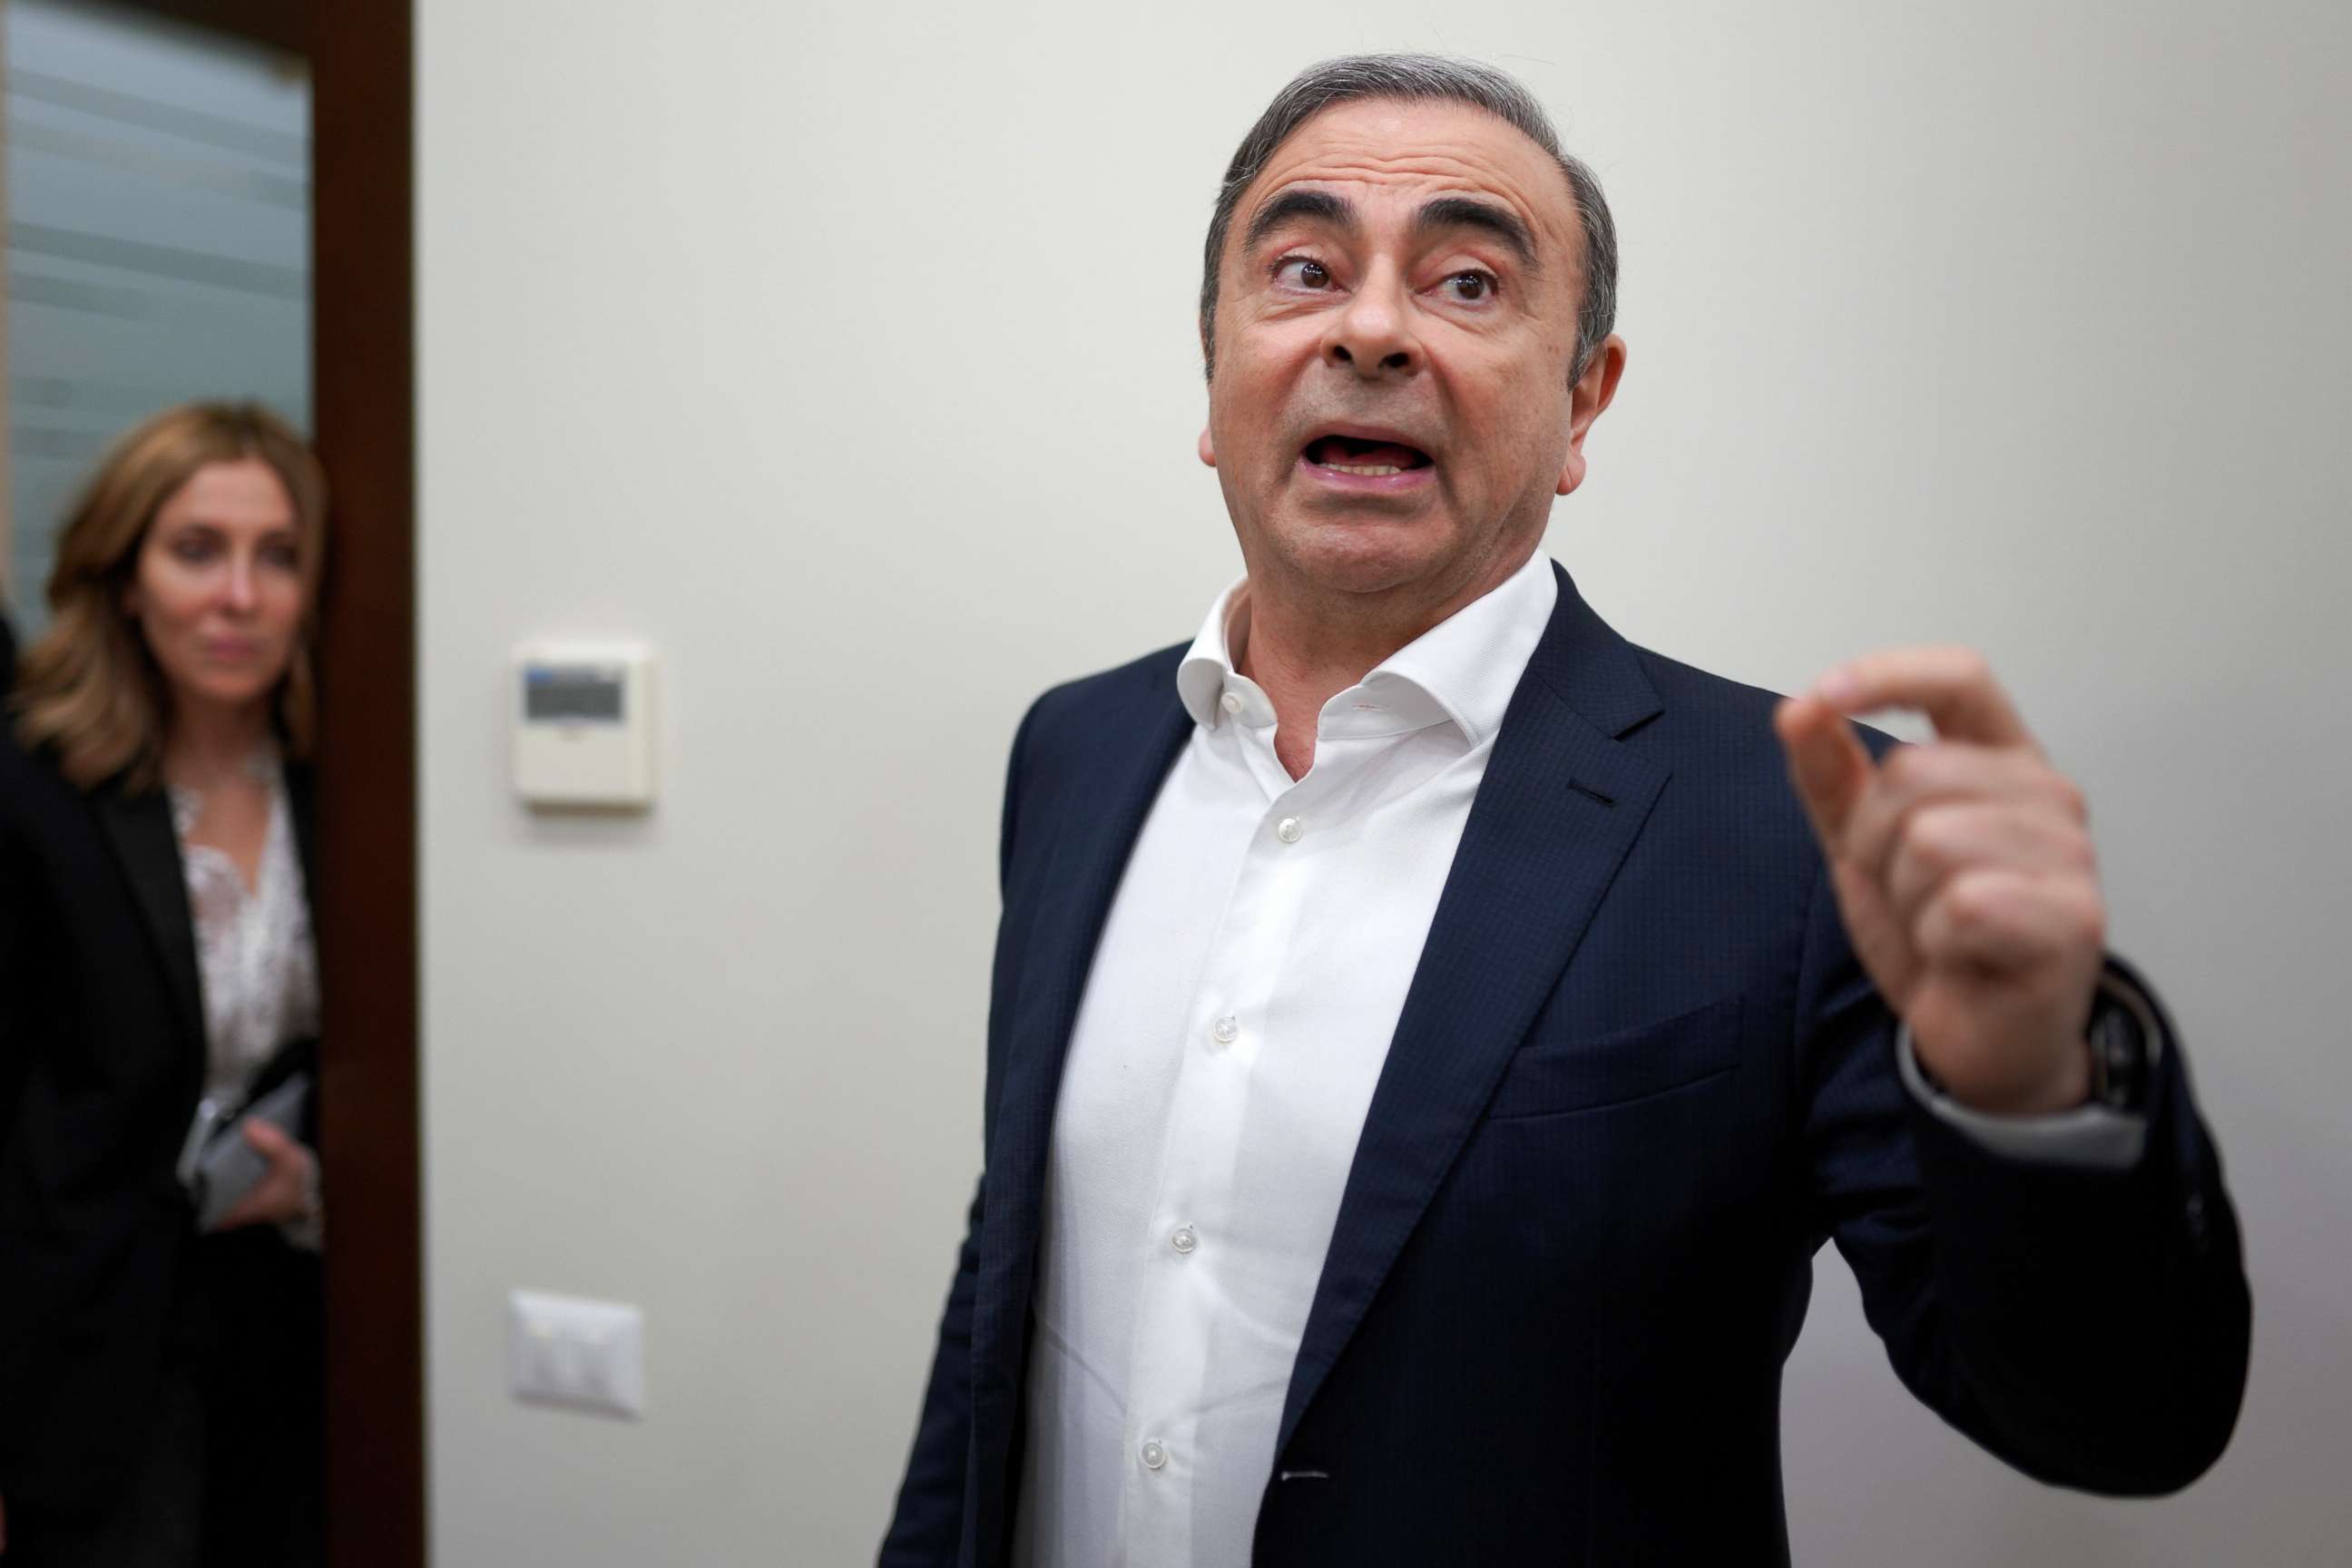 PHOTO: Former Nissan Motor CEO Carlos Ghosn speaks during a group interview for Japanese media on Jan. 10, 2020, in Beirut, Lebanon.